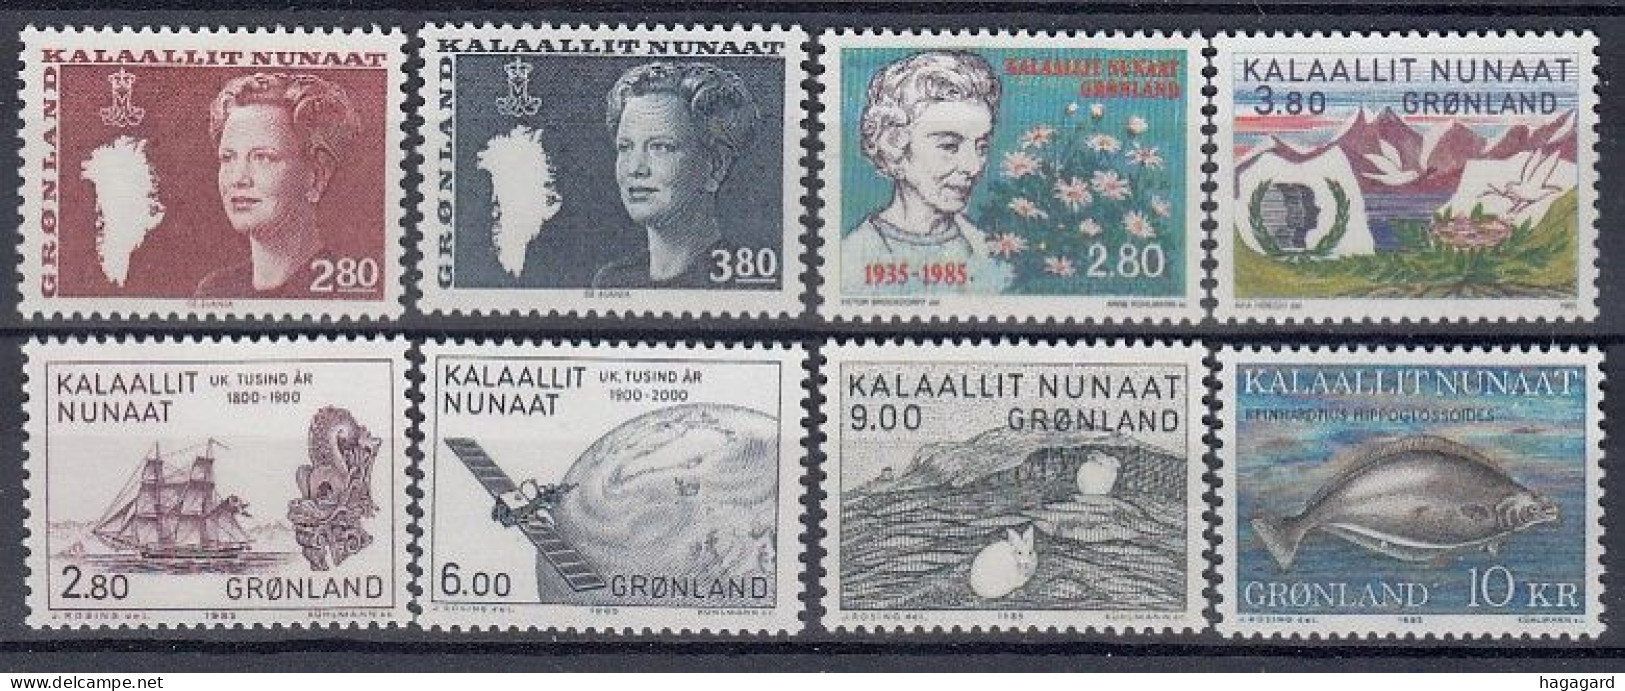 G2208. Greenland 1985. Complete Year Set. Michel 155-62. (15.10€). MNH(**) - Années Complètes